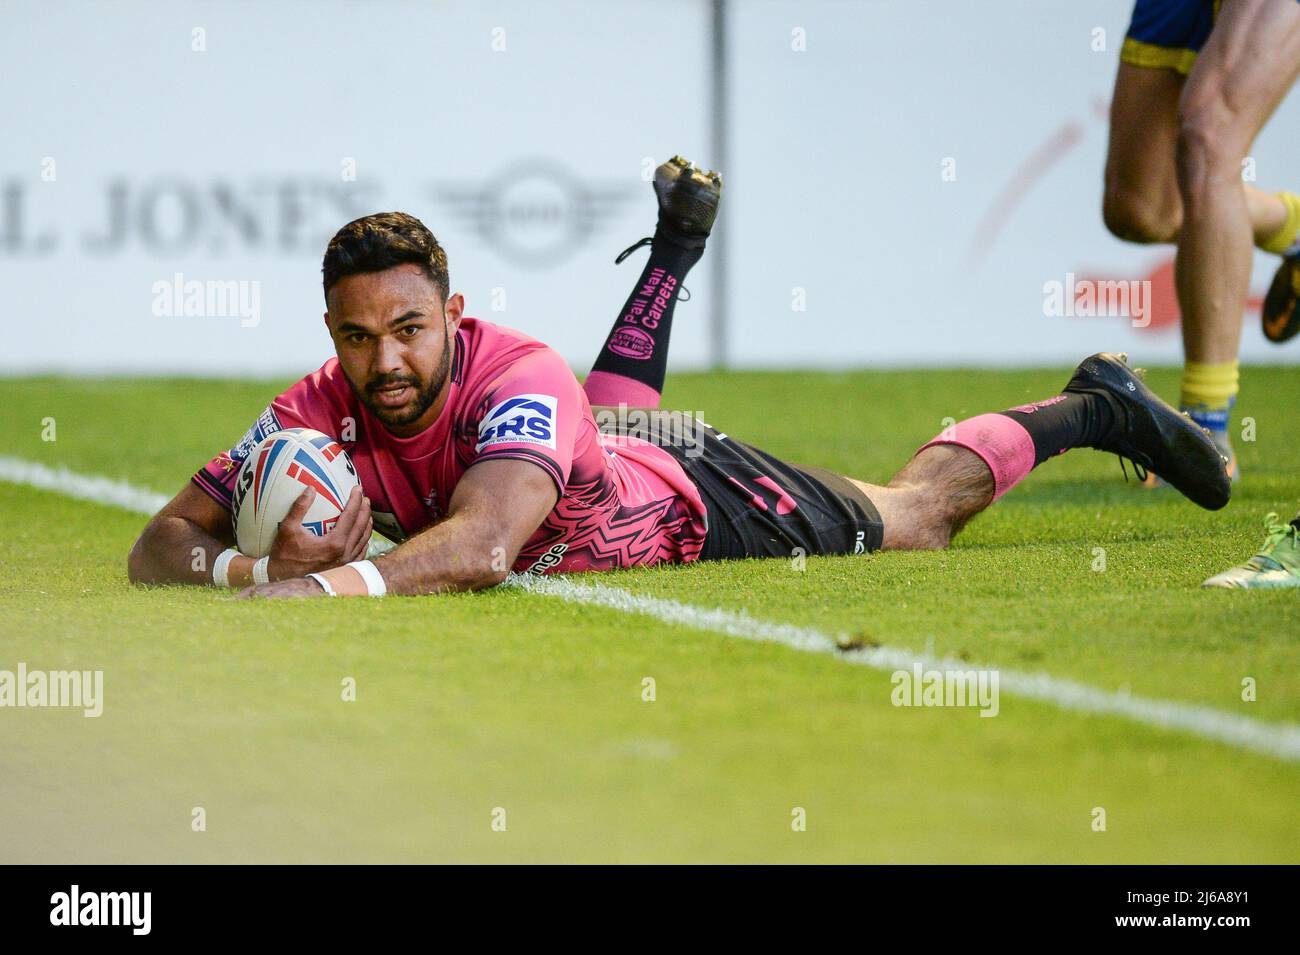 Warrington, UK. 29th Apr, 2022. Warrington, England -29th April 2022 - Bevan French of Wigan Warriors scores a try. Rugby League Betfred Super League Round 10 Warrington Wolves vs Wigan Warriors at Halliwell Jones Stadium, Warrington, UK  Dean Williams Credit: Dean Williams/Alamy Live News Stock Photo